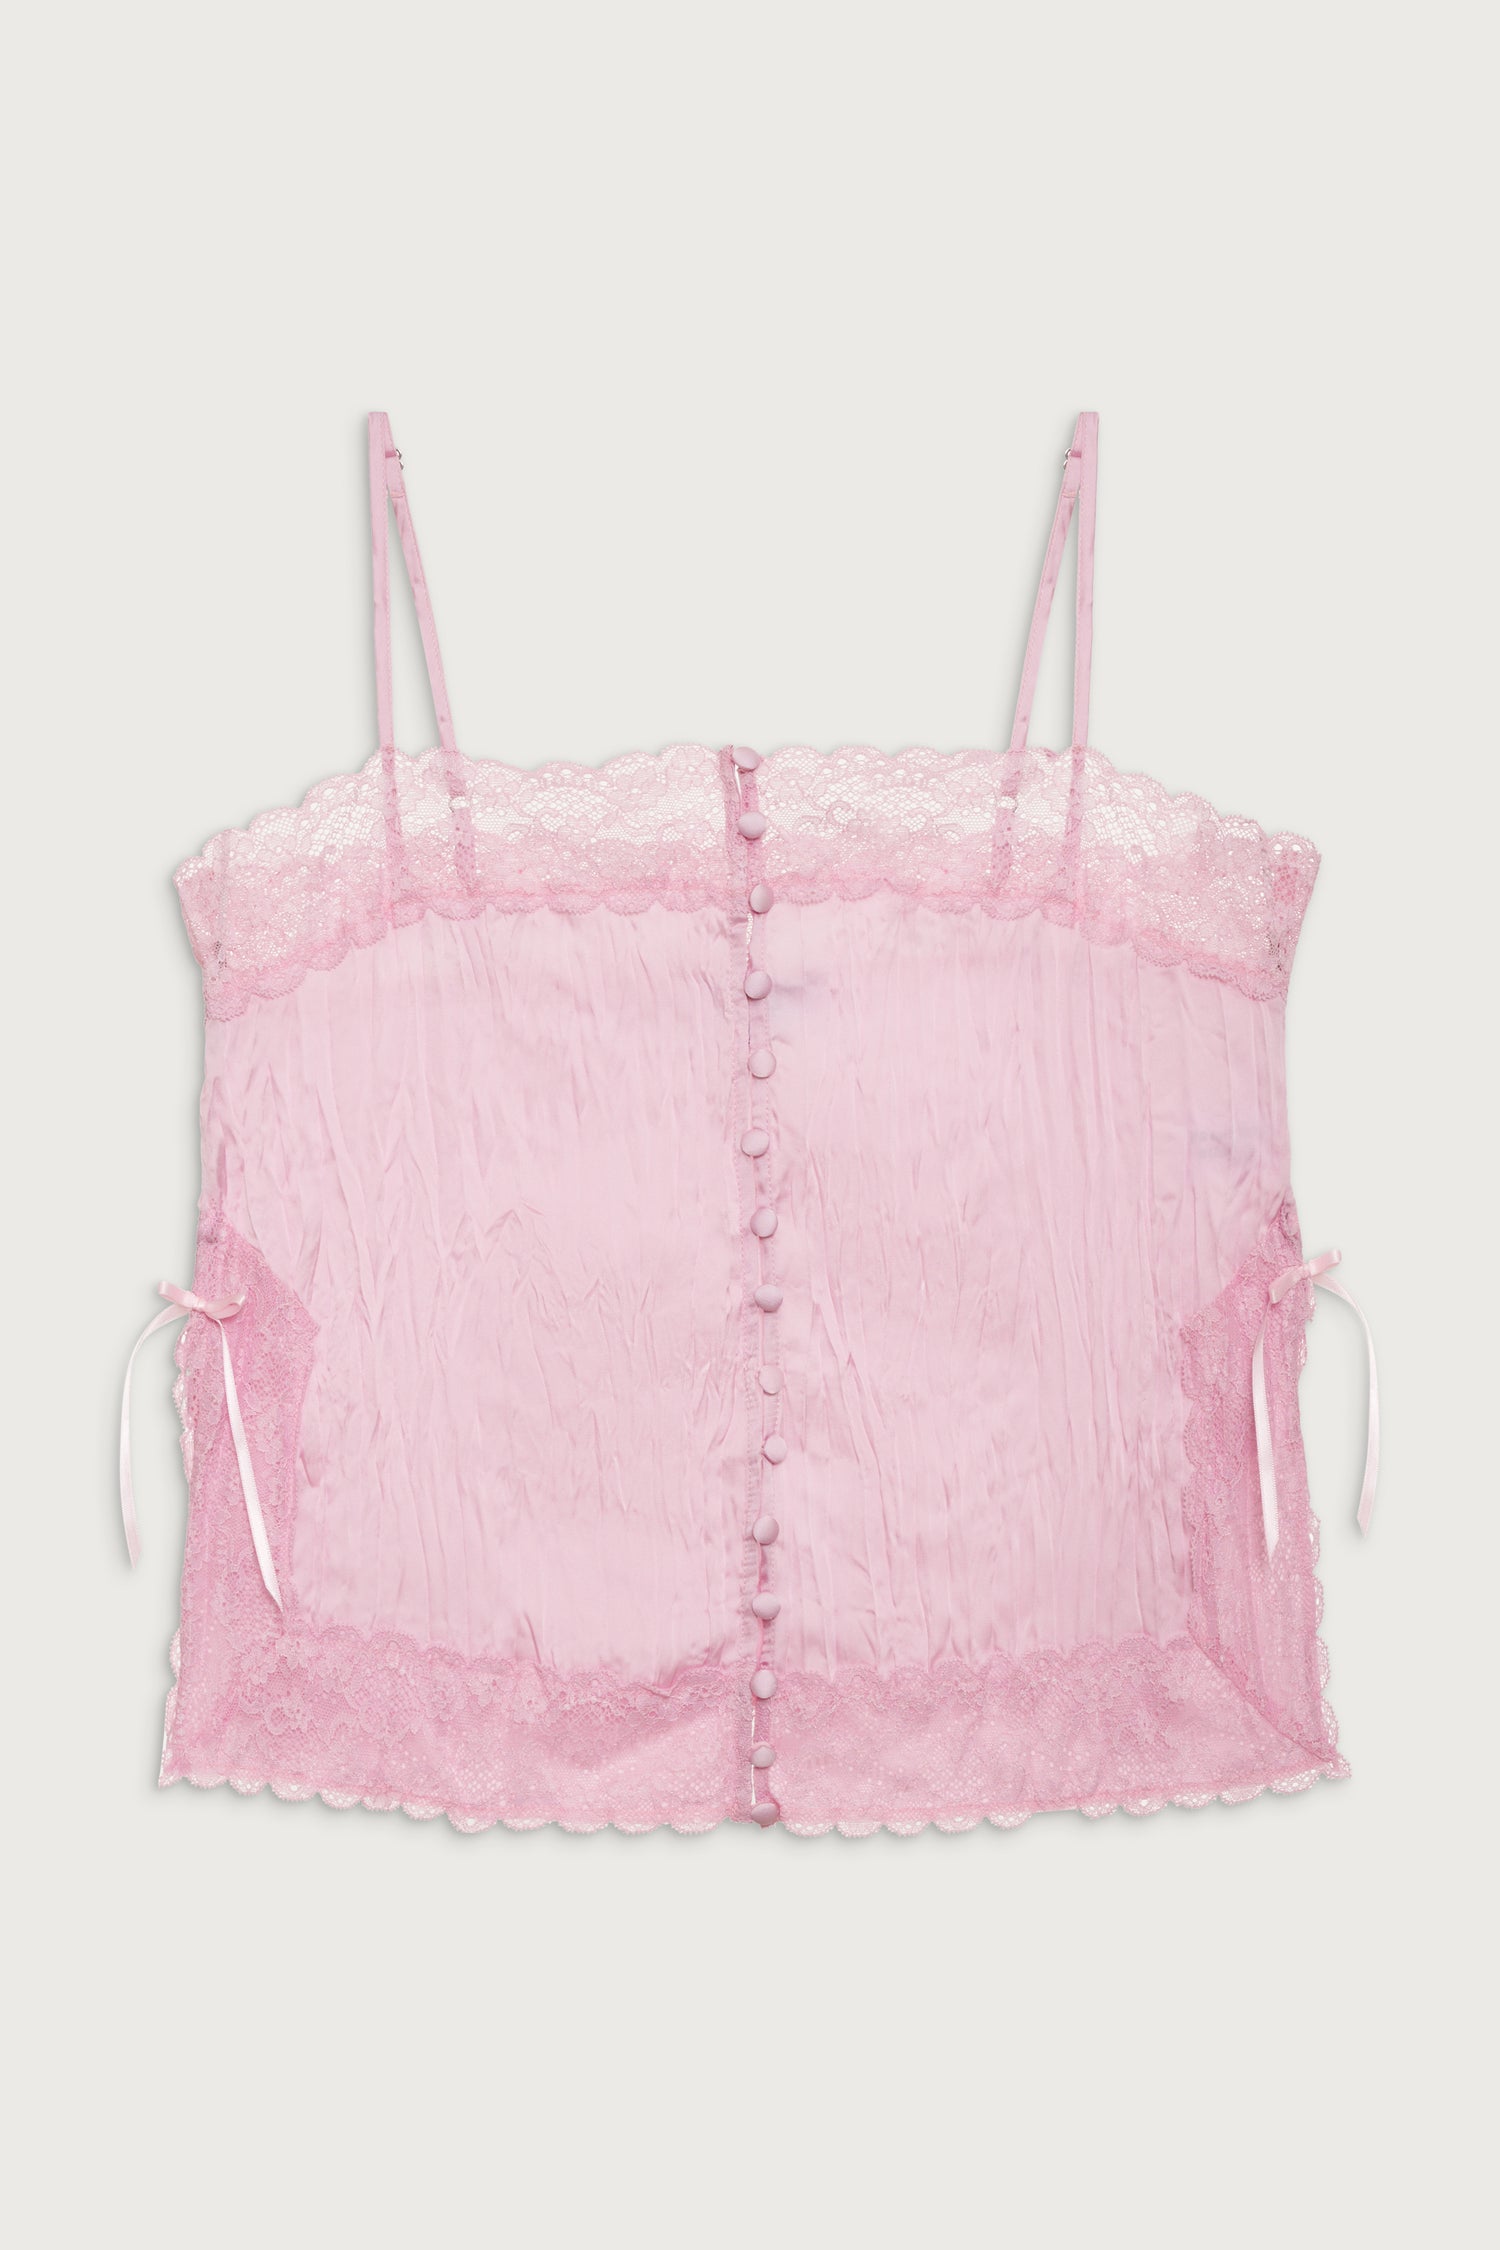 Besos Satin Camisole - French Rose